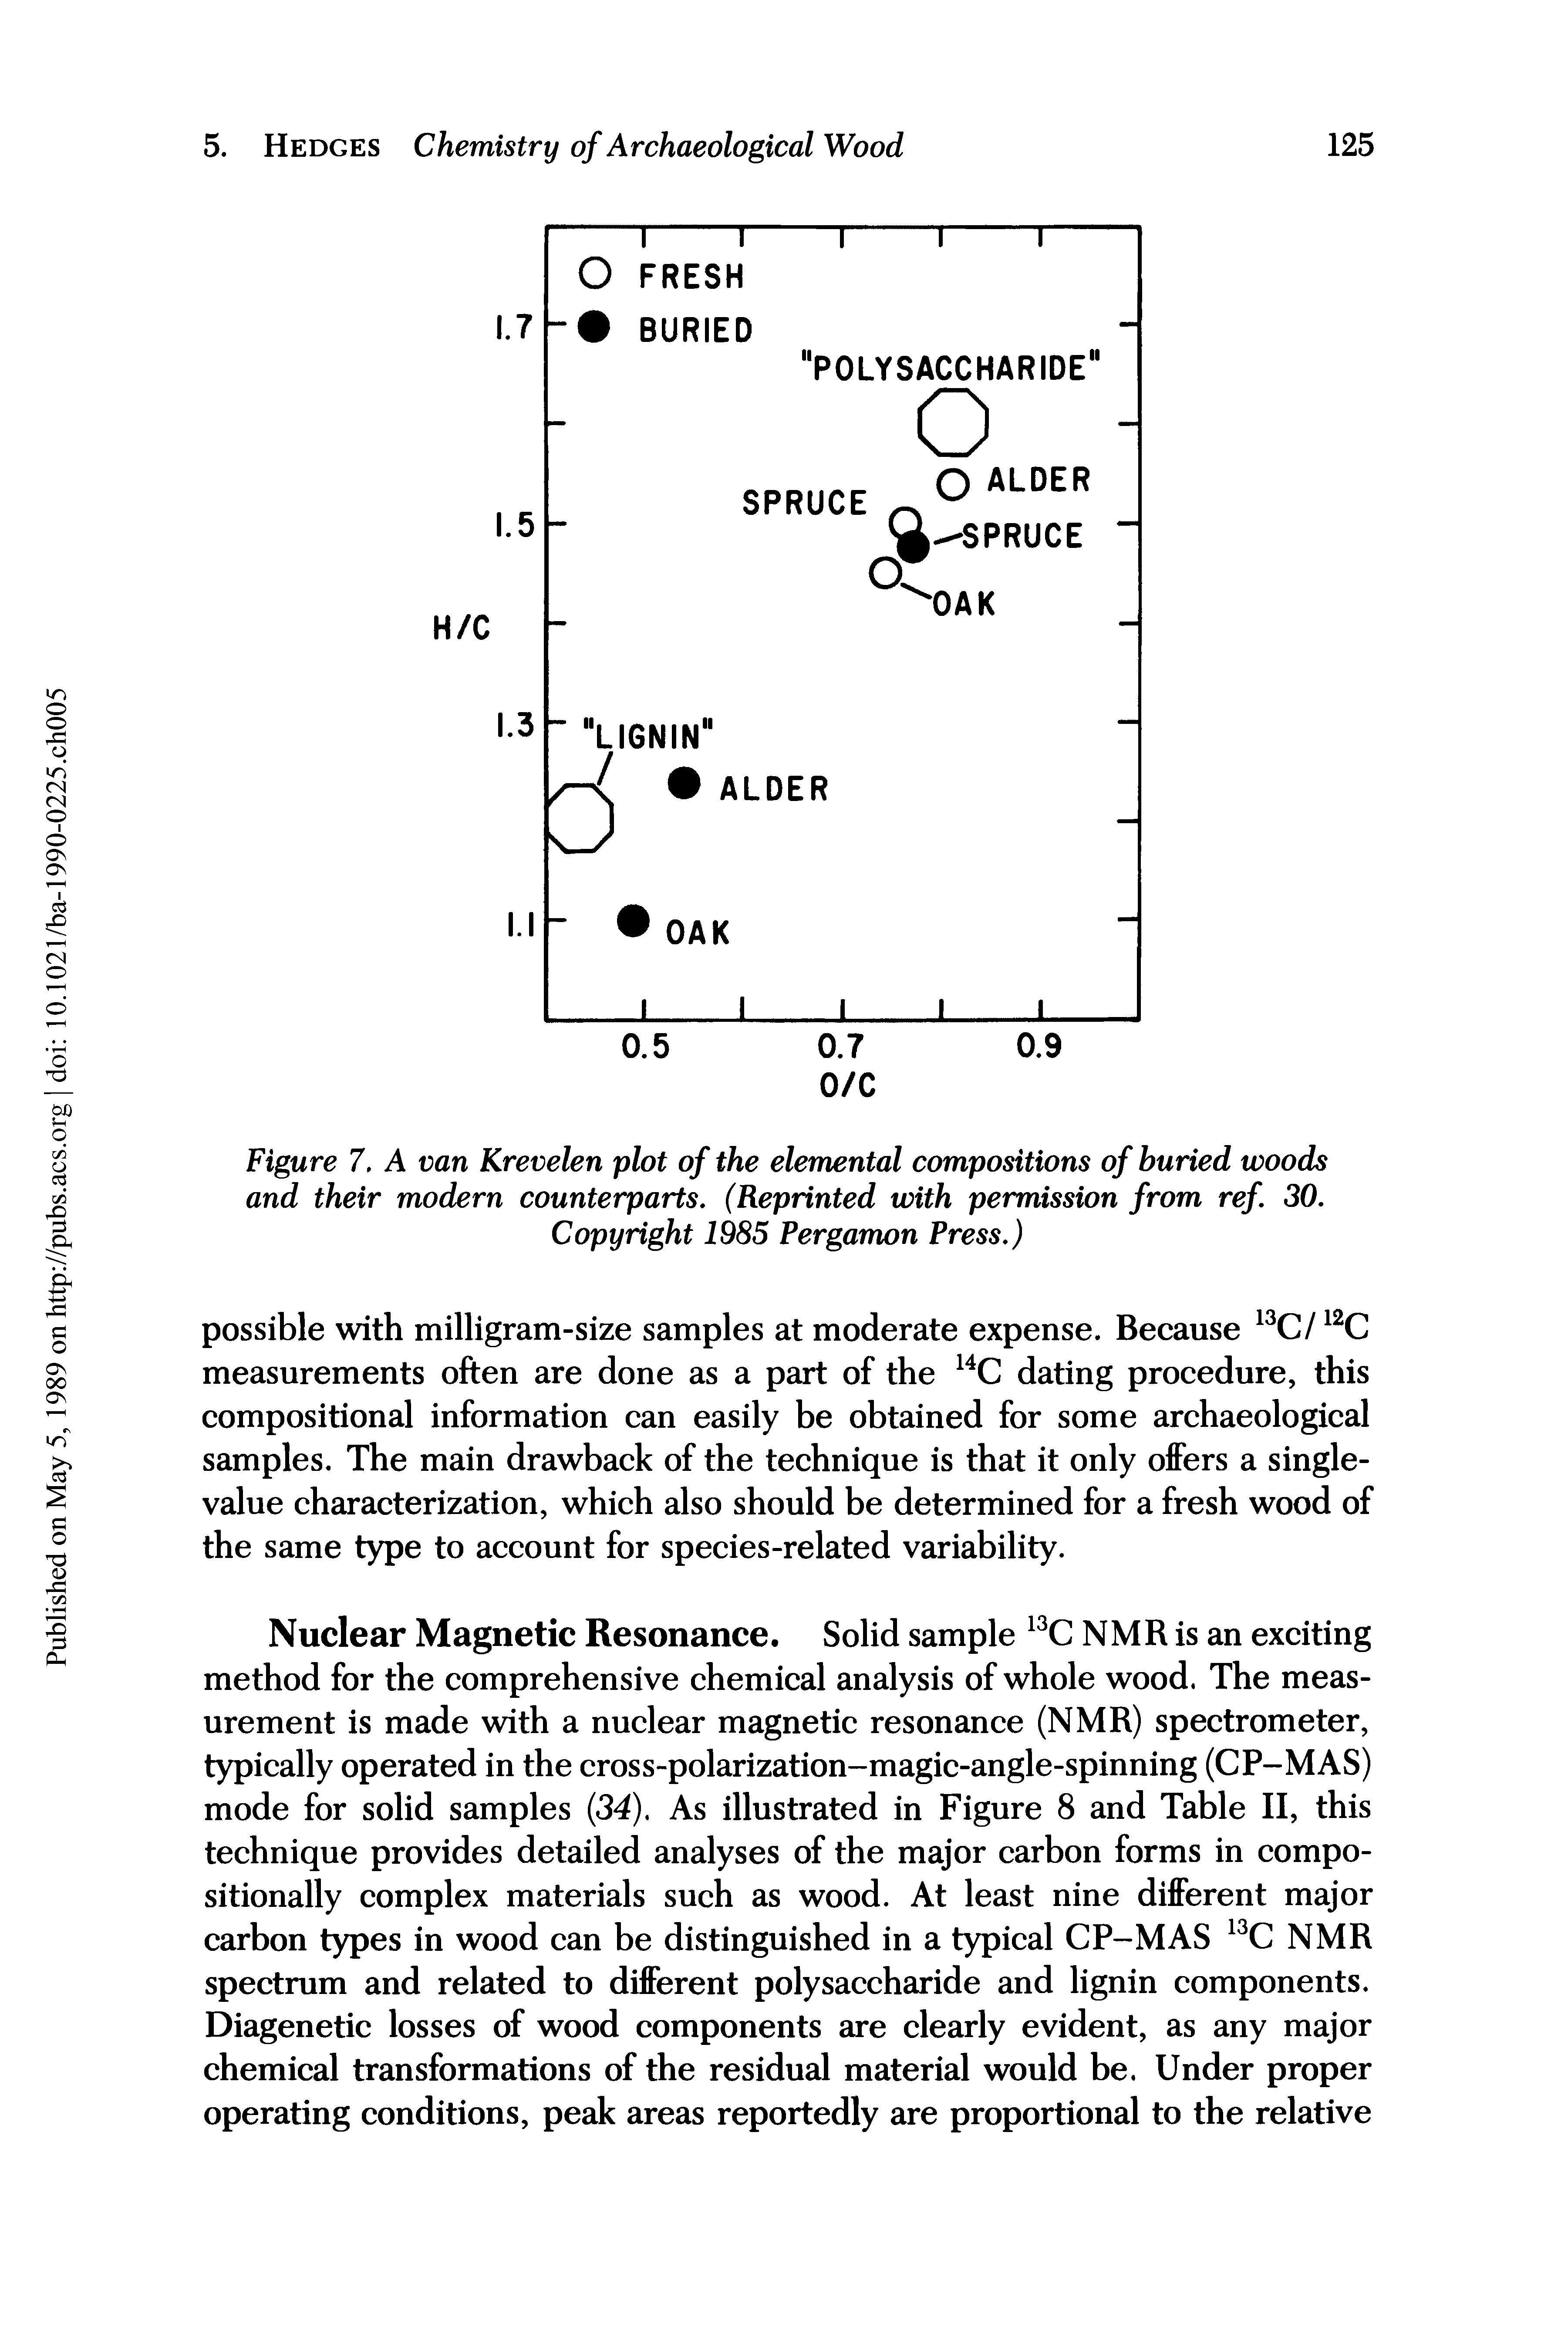 Figure 7. A van Krevelen plot of the elemental compositions of buried woods and their modern counterparts. (Reprinted with permission from ref 30.